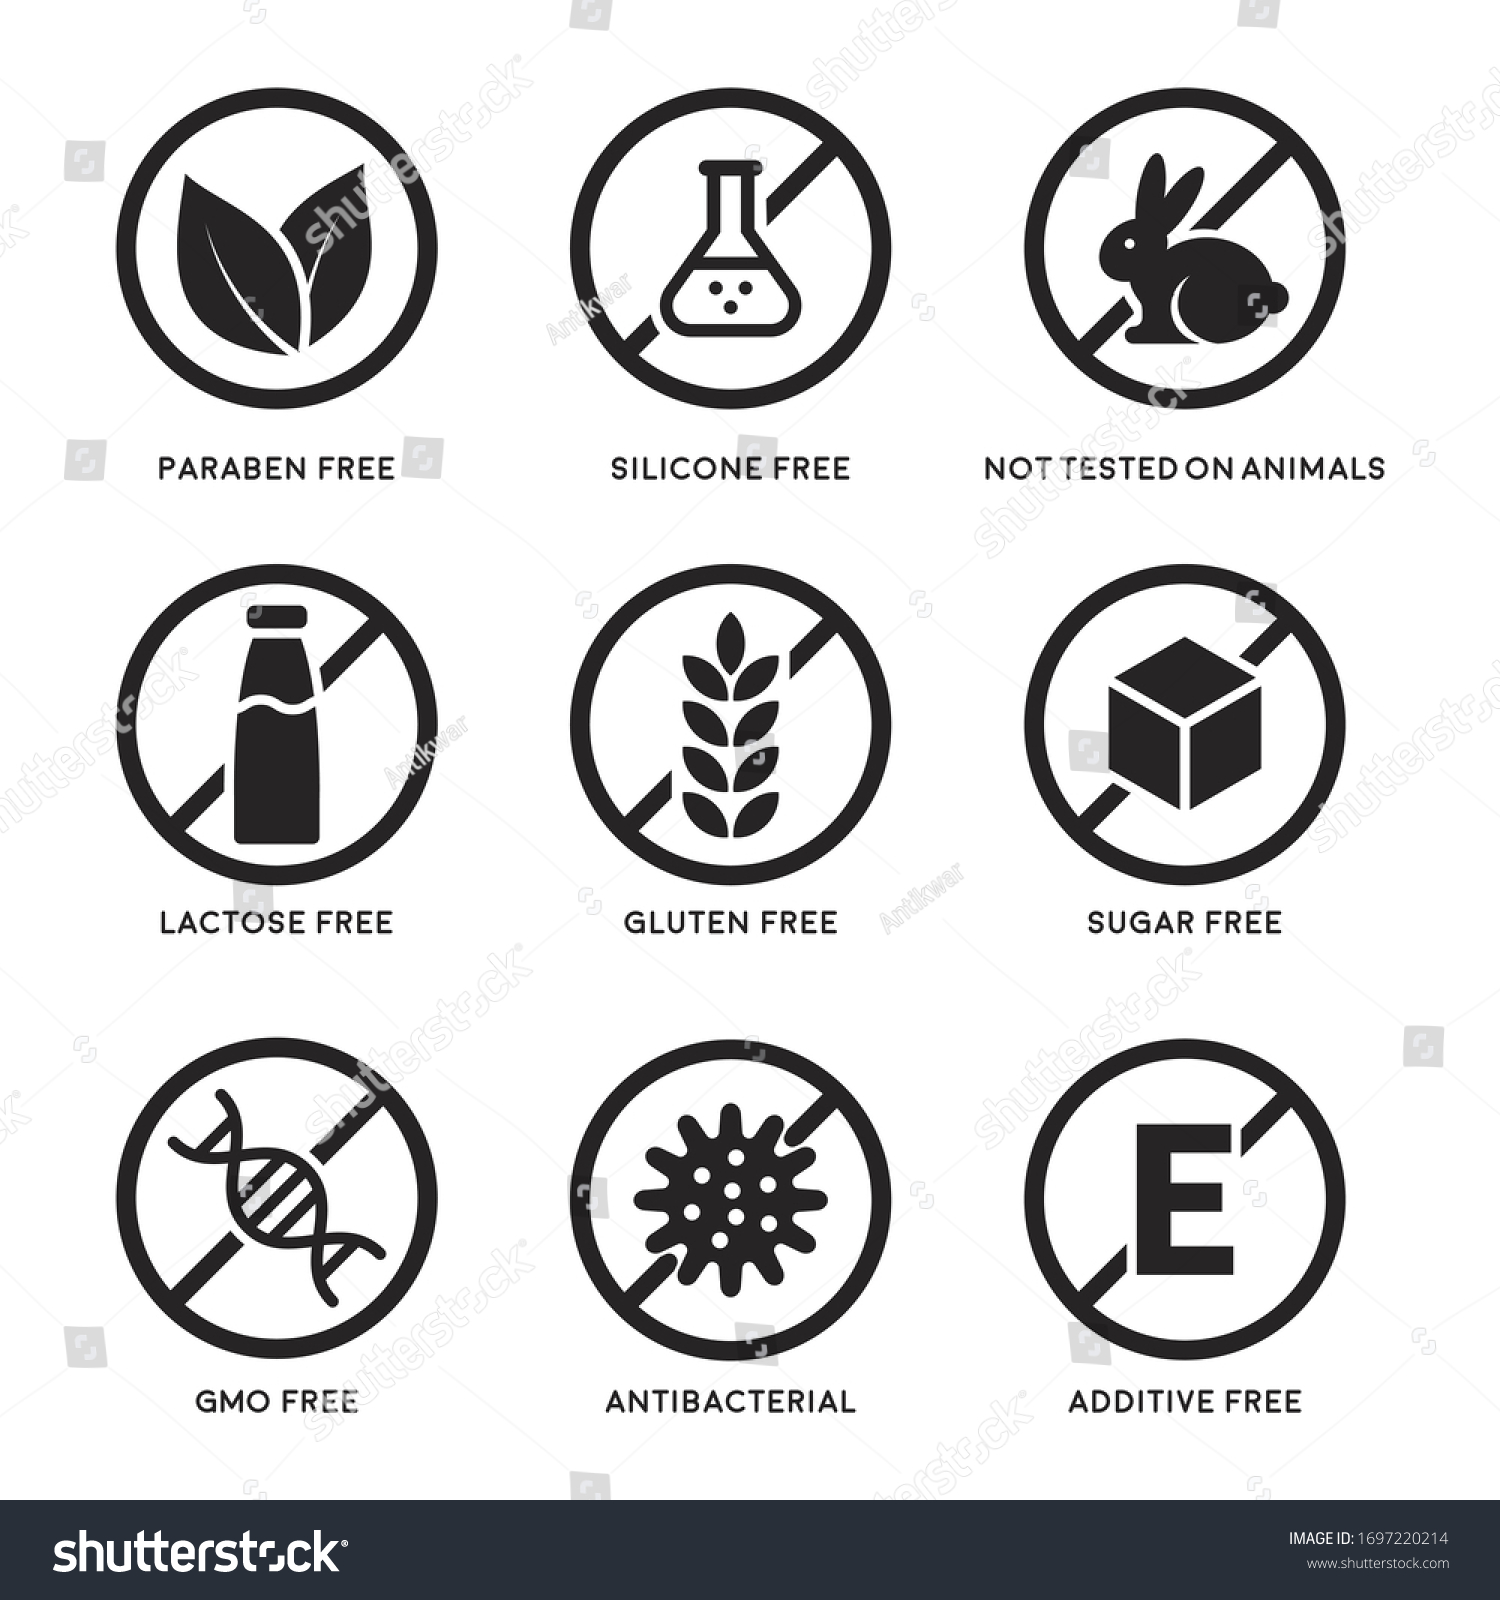 Set of icons Gluten Free, Lactose Free, GMO Free, Paraben, Food additive, Sugar free, Not Tested on Animals, Antibacterial, Silicone vector icons #1697220214